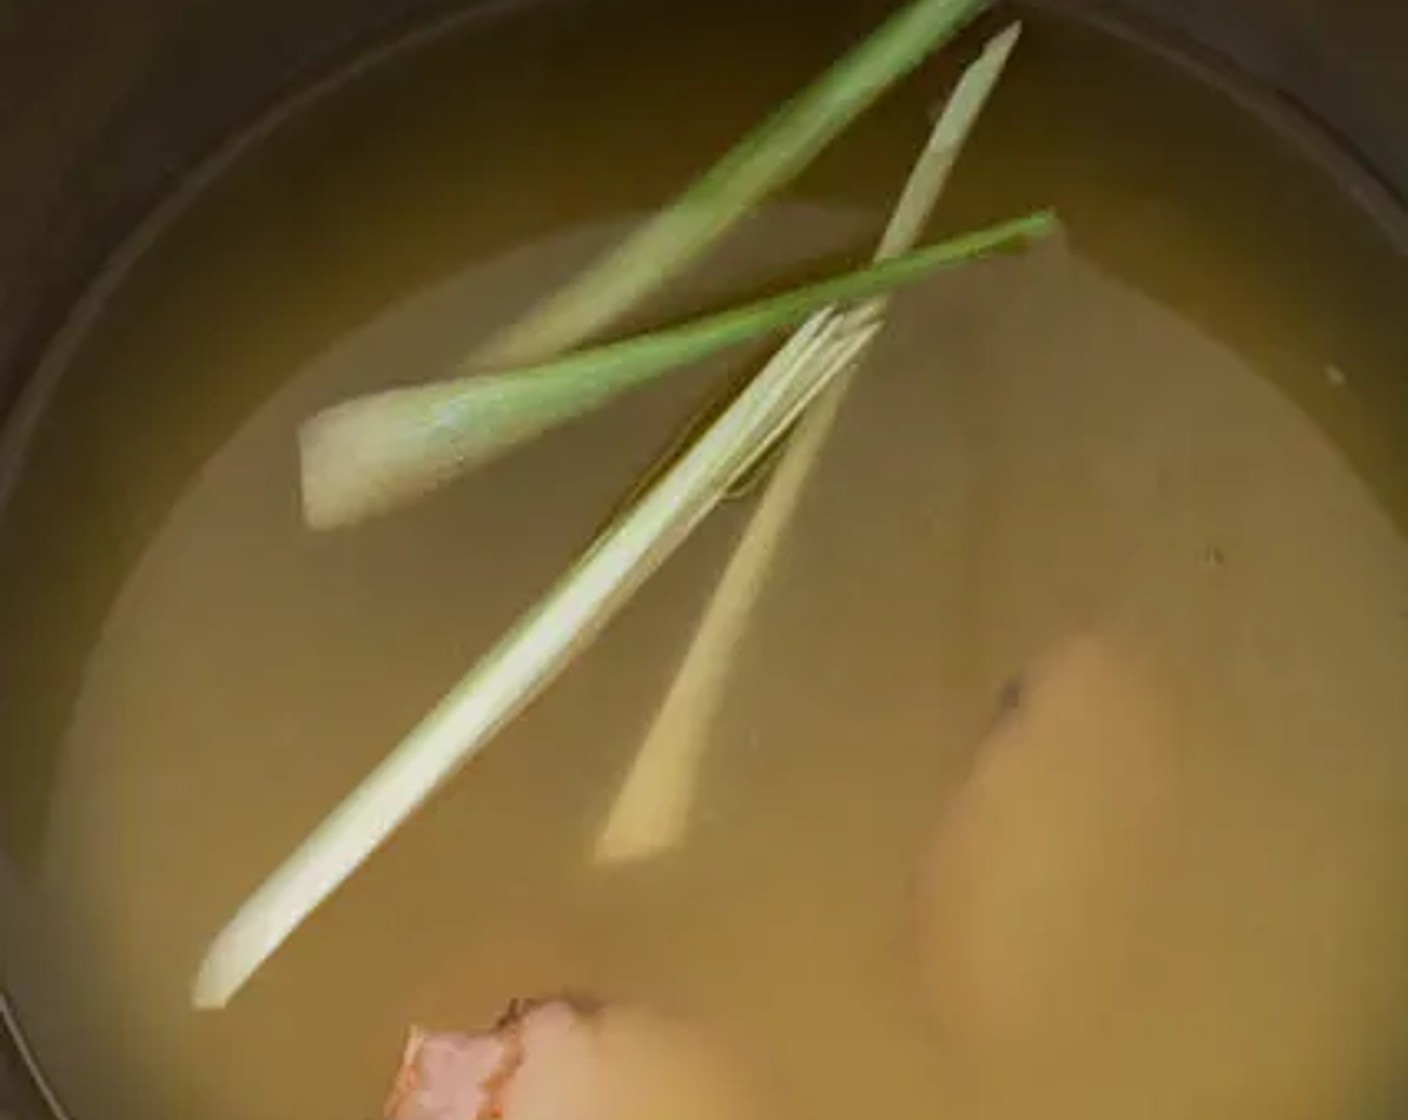 step 1 Pour Chicken Stock (4 cups) into a medium-sized pot or saucepan. Add Lemongrass (2 stalks) and Galangal (3 slices) to the chicken stock, then bring it to a boil over medium-high heat.